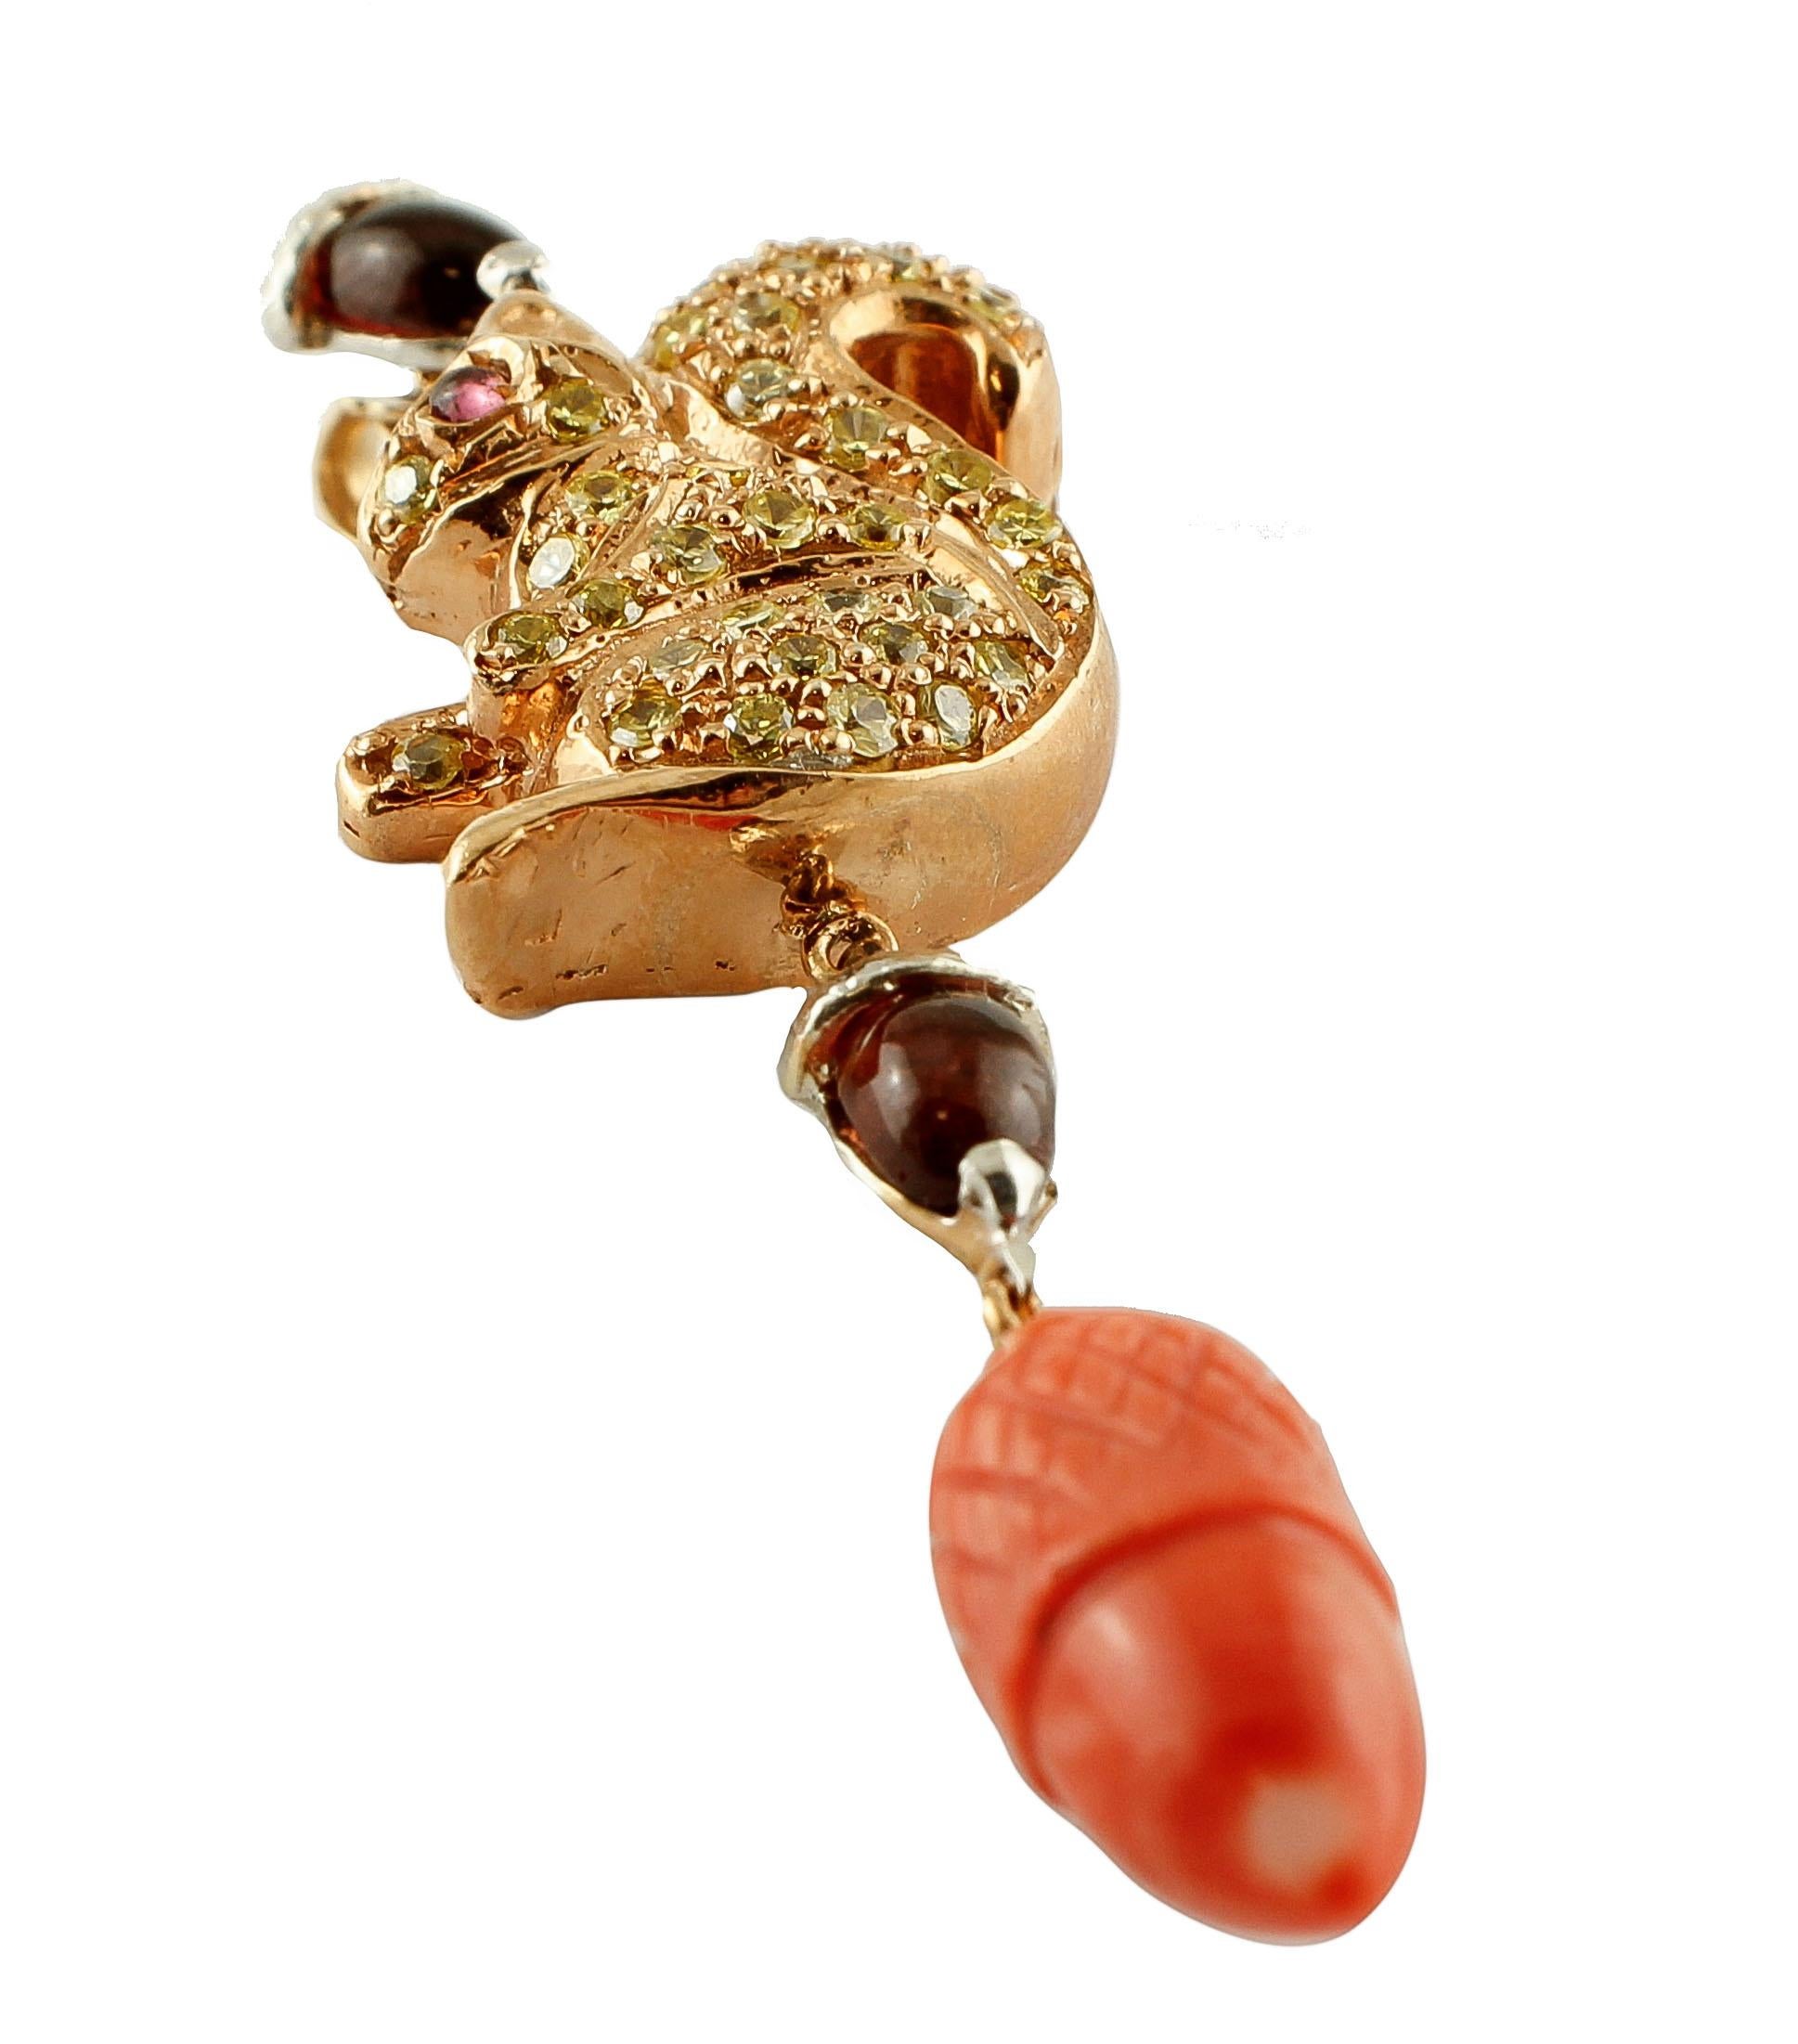 Earrings in 9k rose gold and silver structure featuring a gold squirrel studded with zirconia, and decorations of garnets in the upper part and elatius coral in the lower part.
These earrings are totally handmade by Italian master